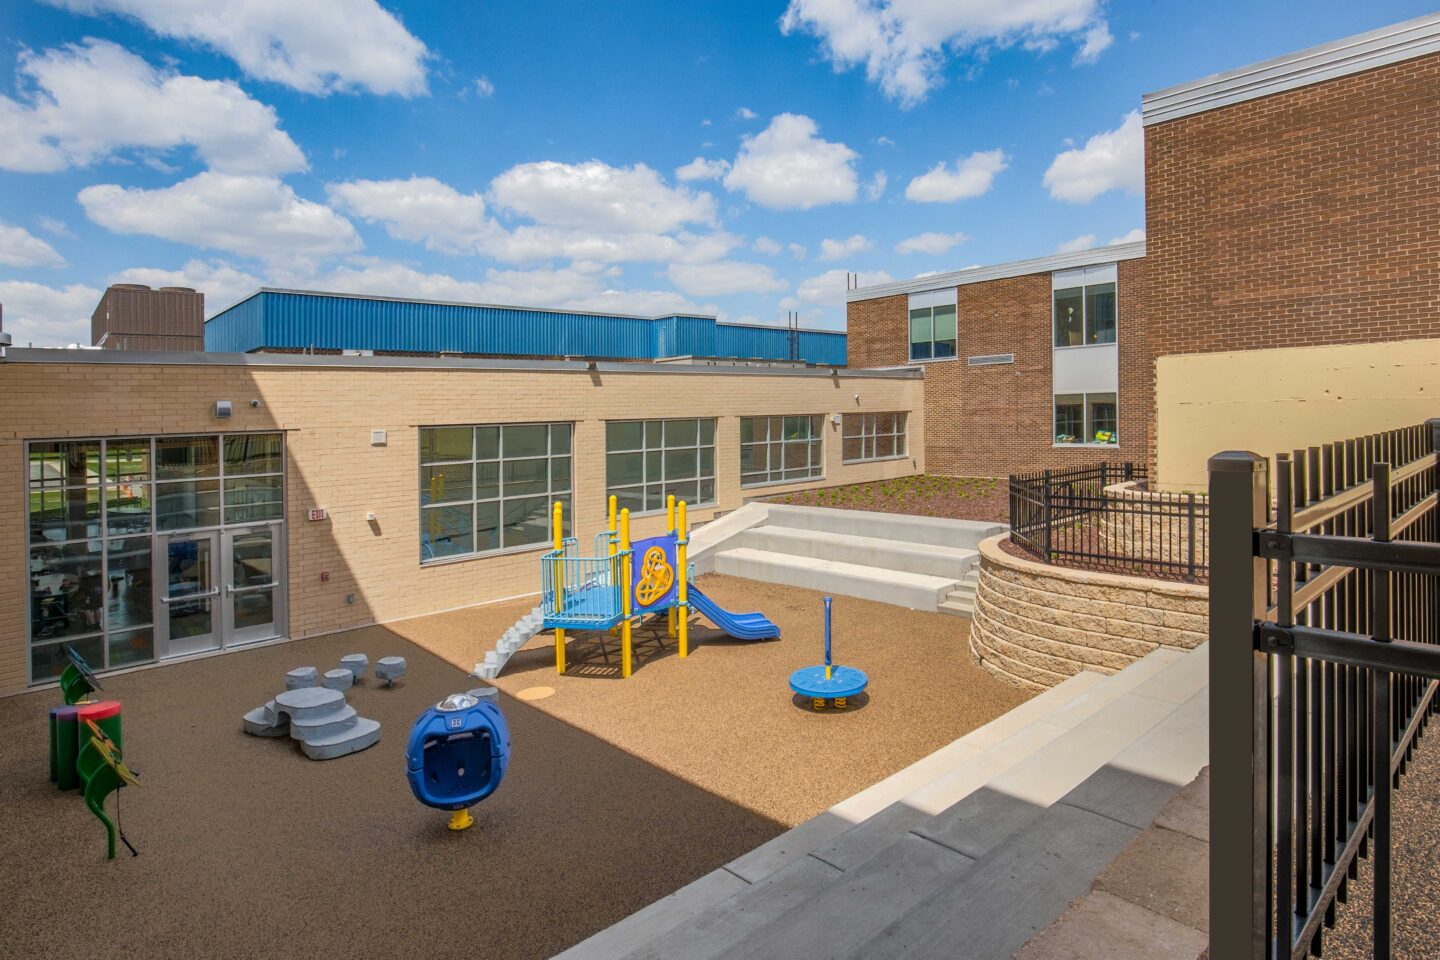 Playgrount equipment nestles into a courtyard flanked by a new addition at Belleville Intermediate School